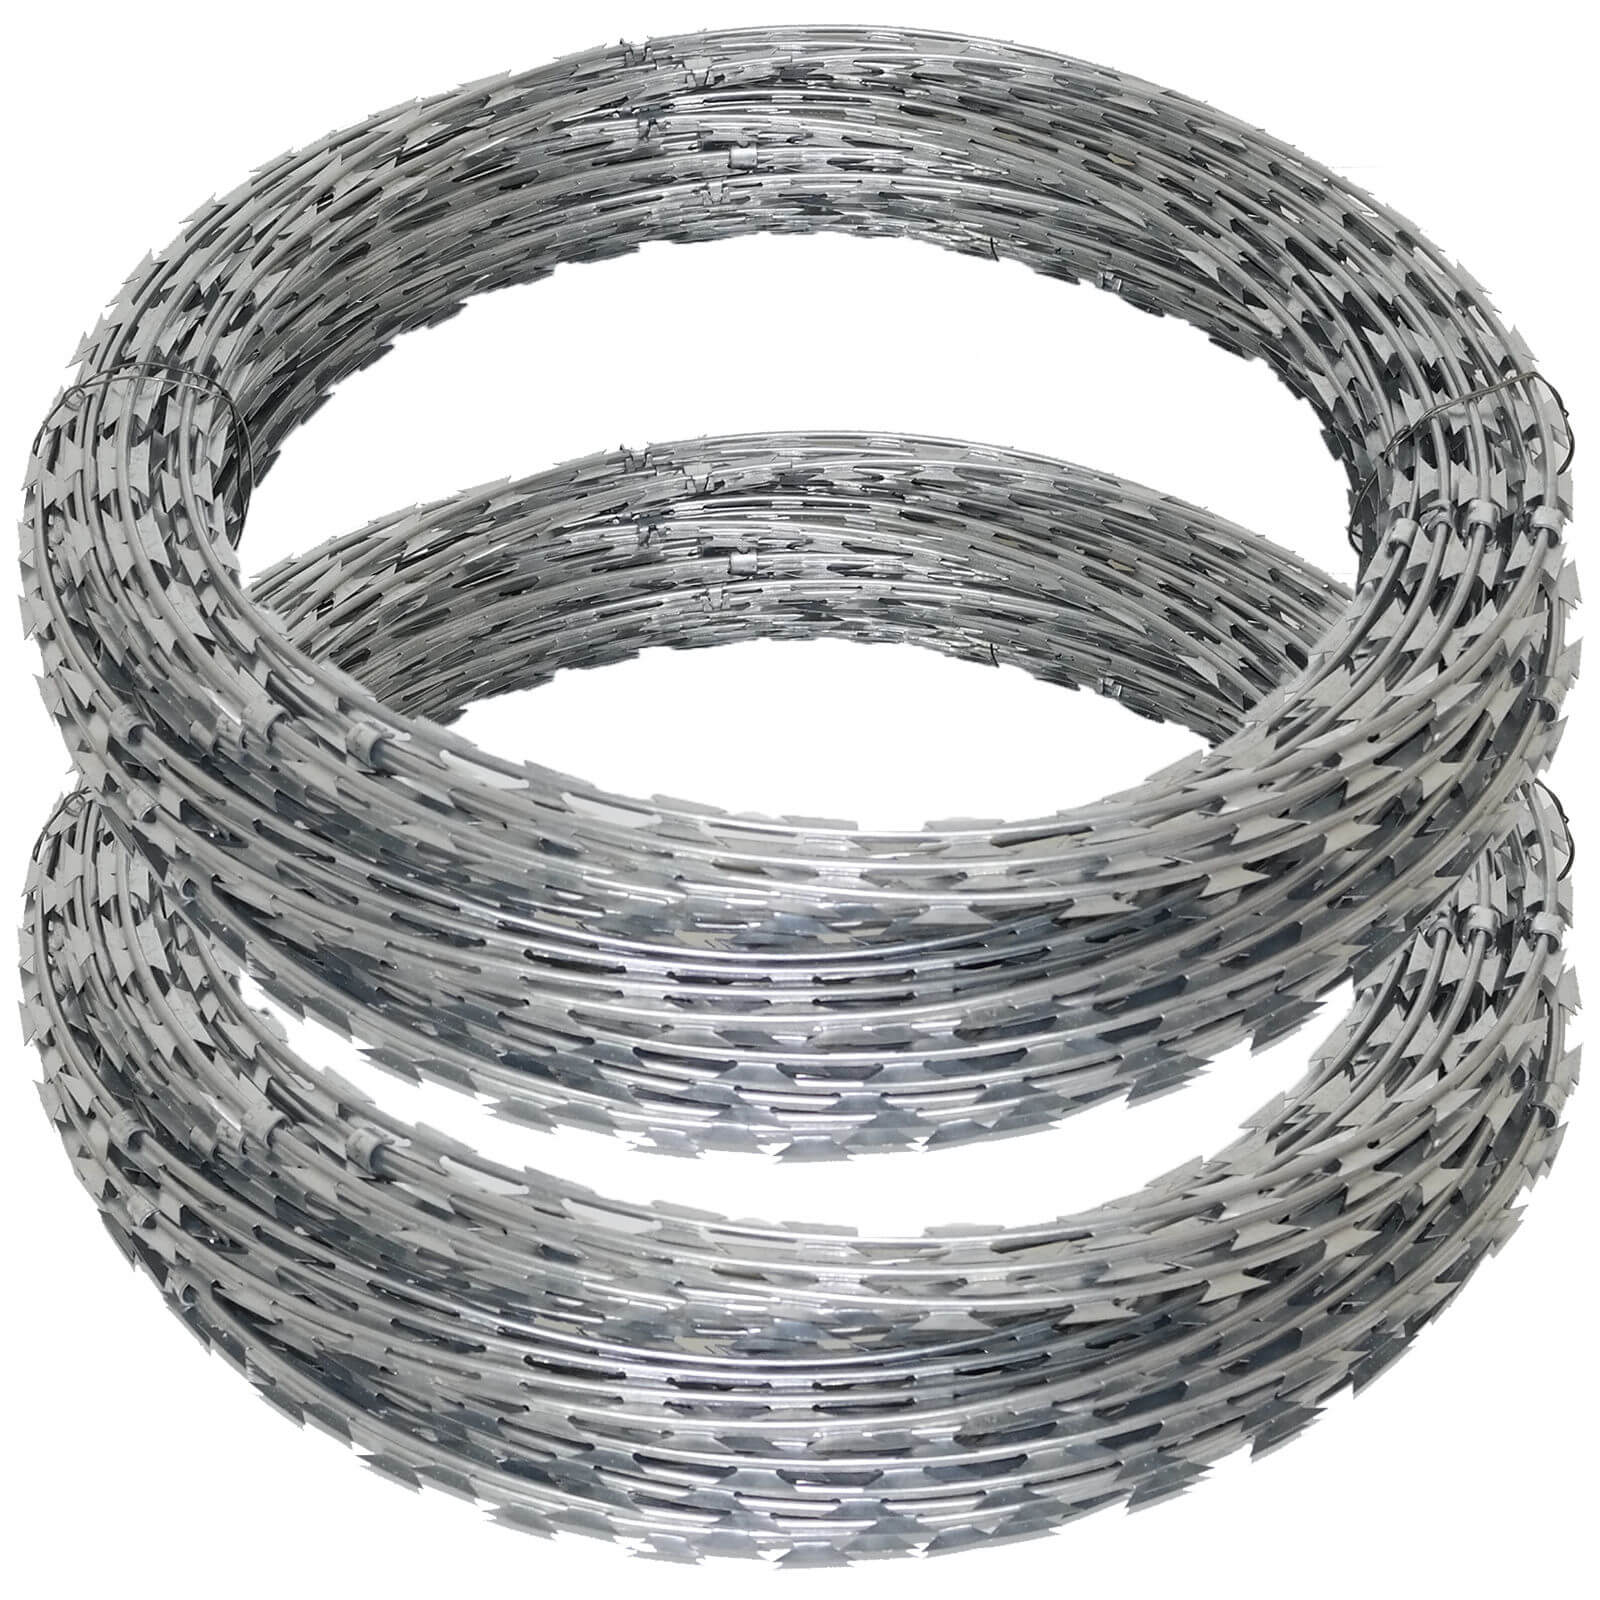 Flat Razor Wire: A Versatile Solution for Perimeter Security Needs